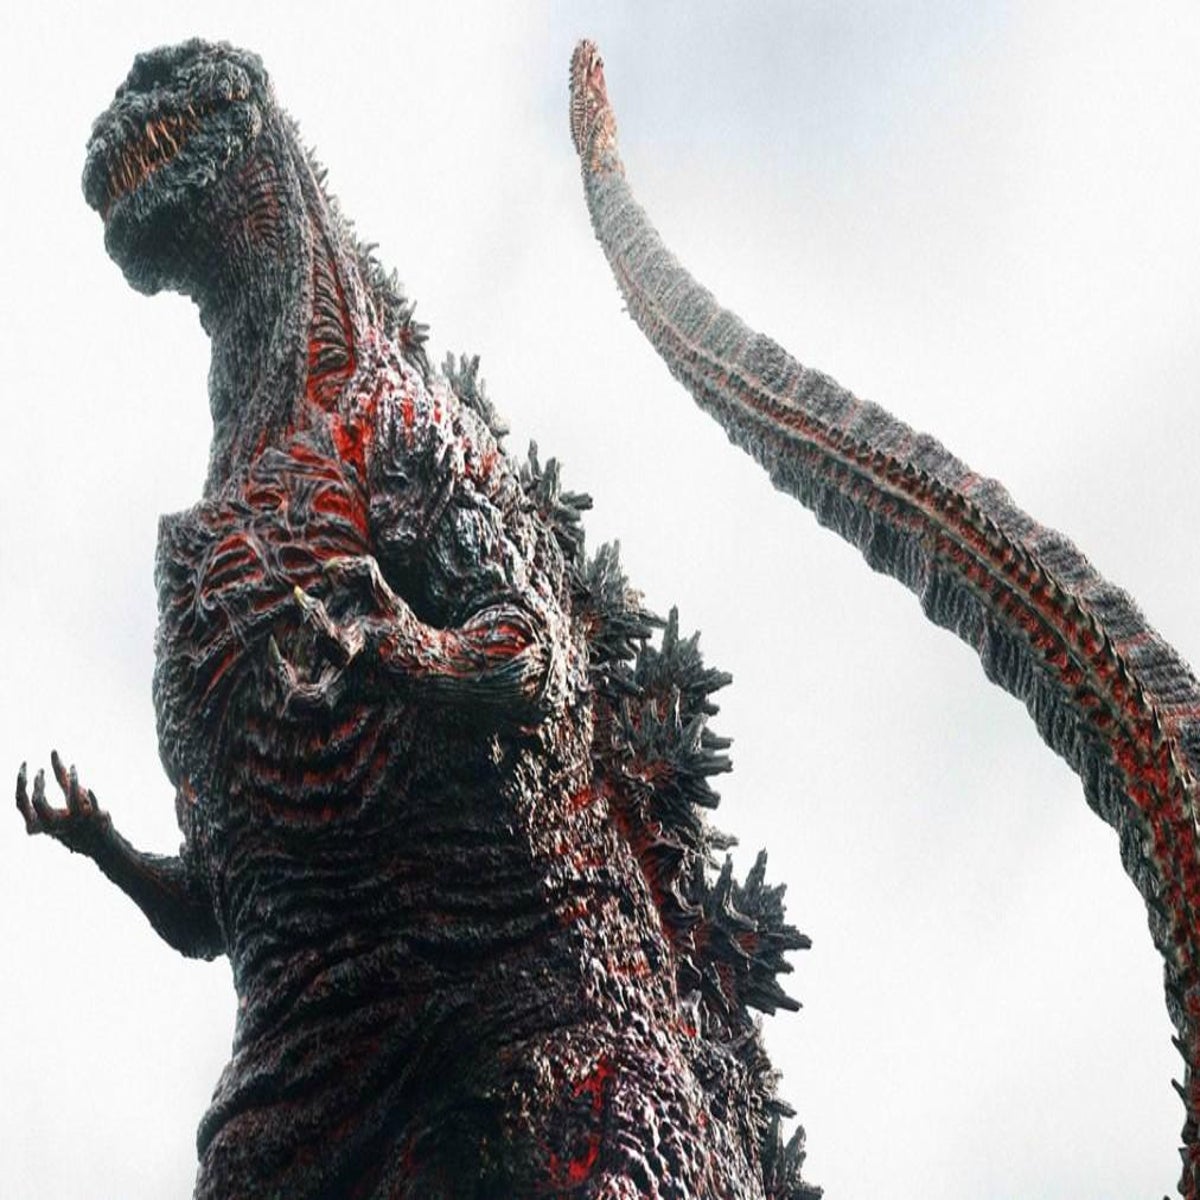 Shin Godzilla: Proof the King of Monsters only truly feels at home in Japan  | The Independent | The Independent